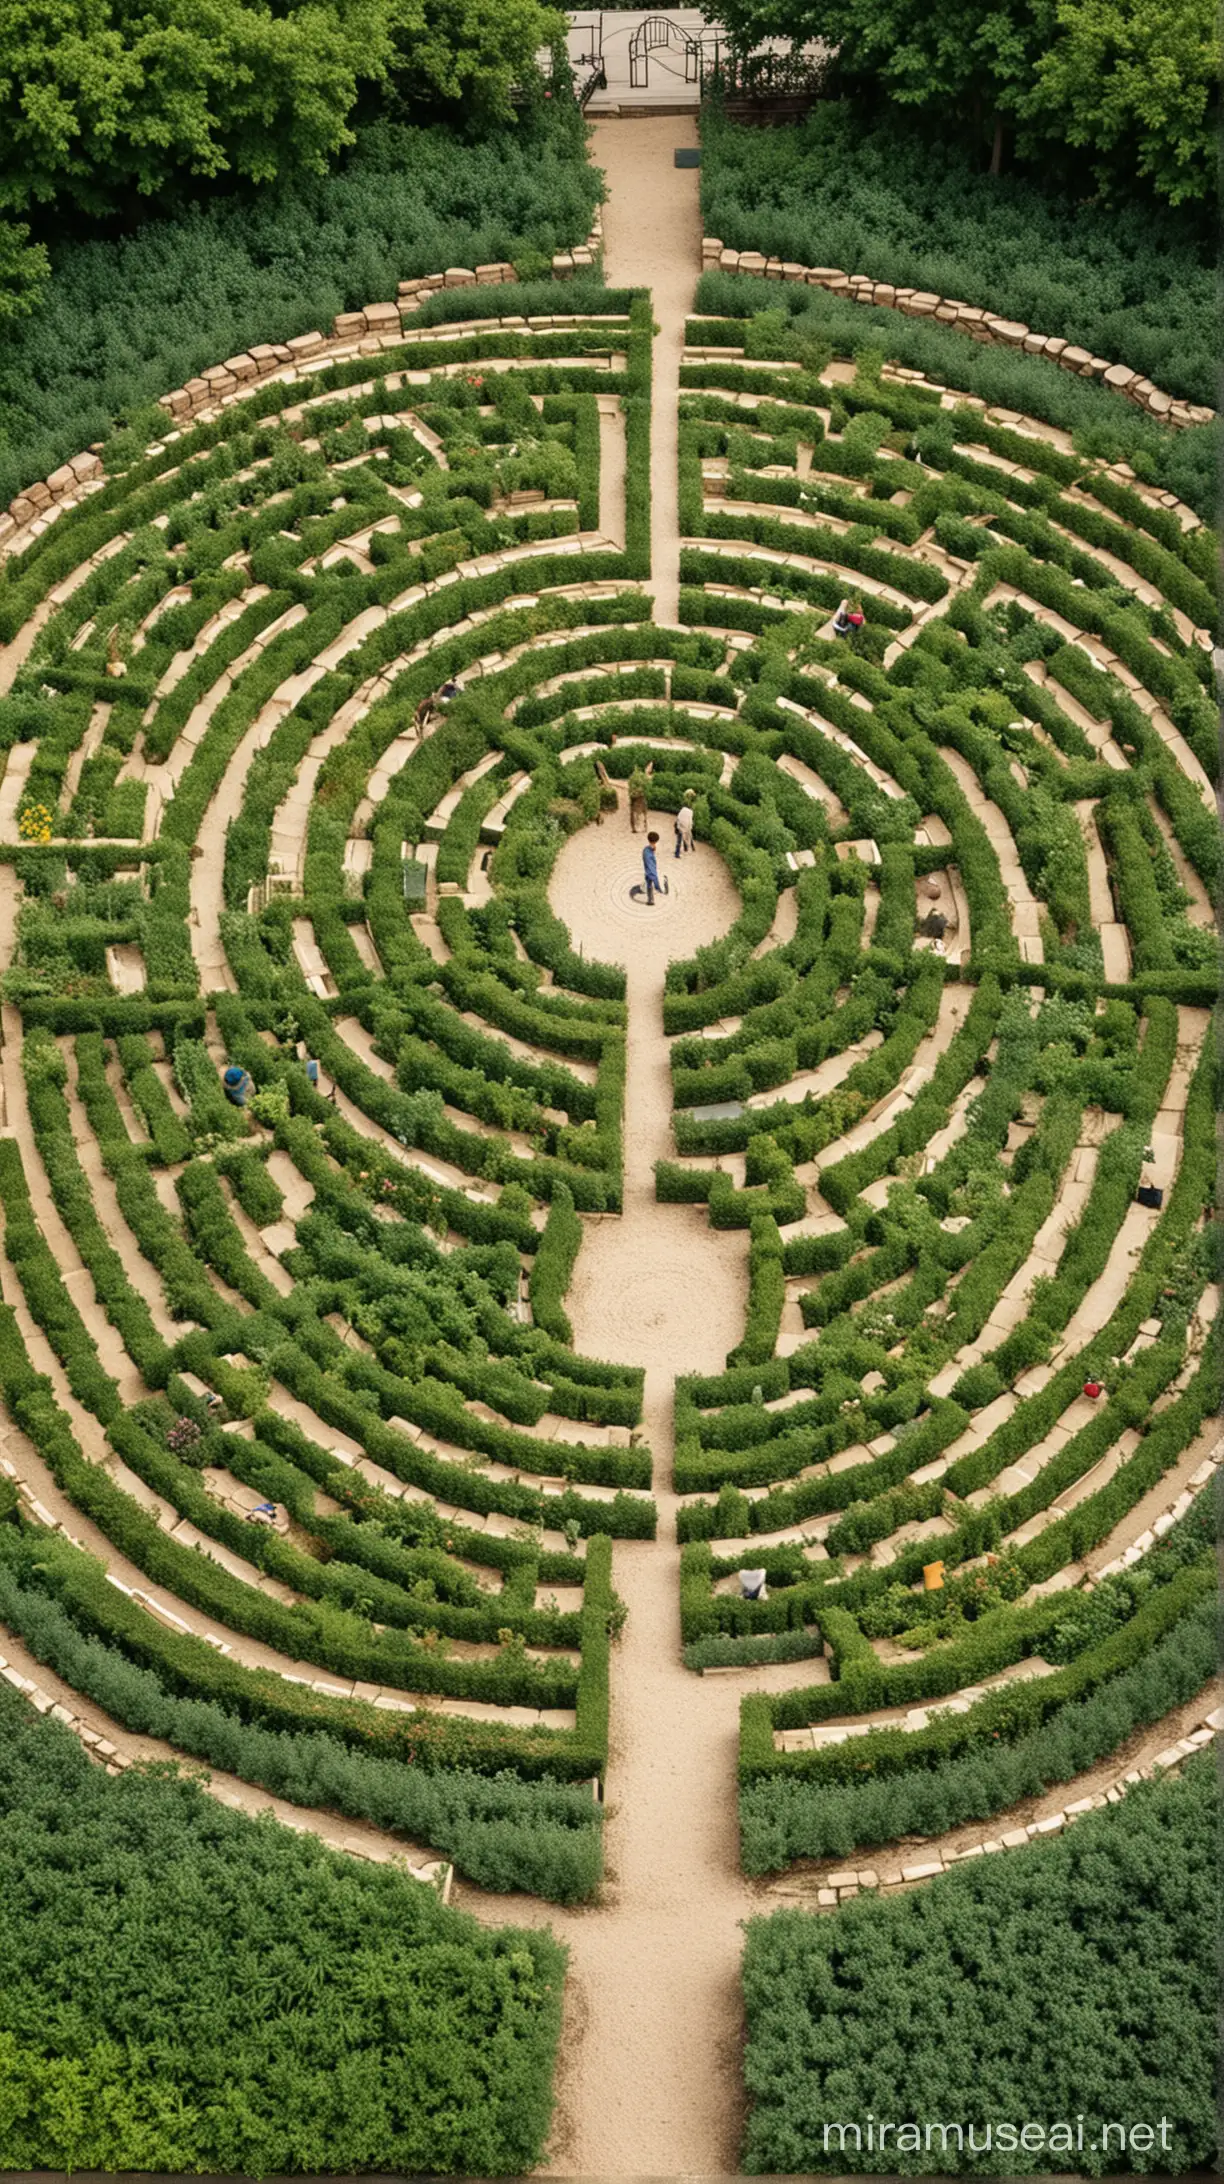 Maze Garden Design with Intricate Pathways and Greenery